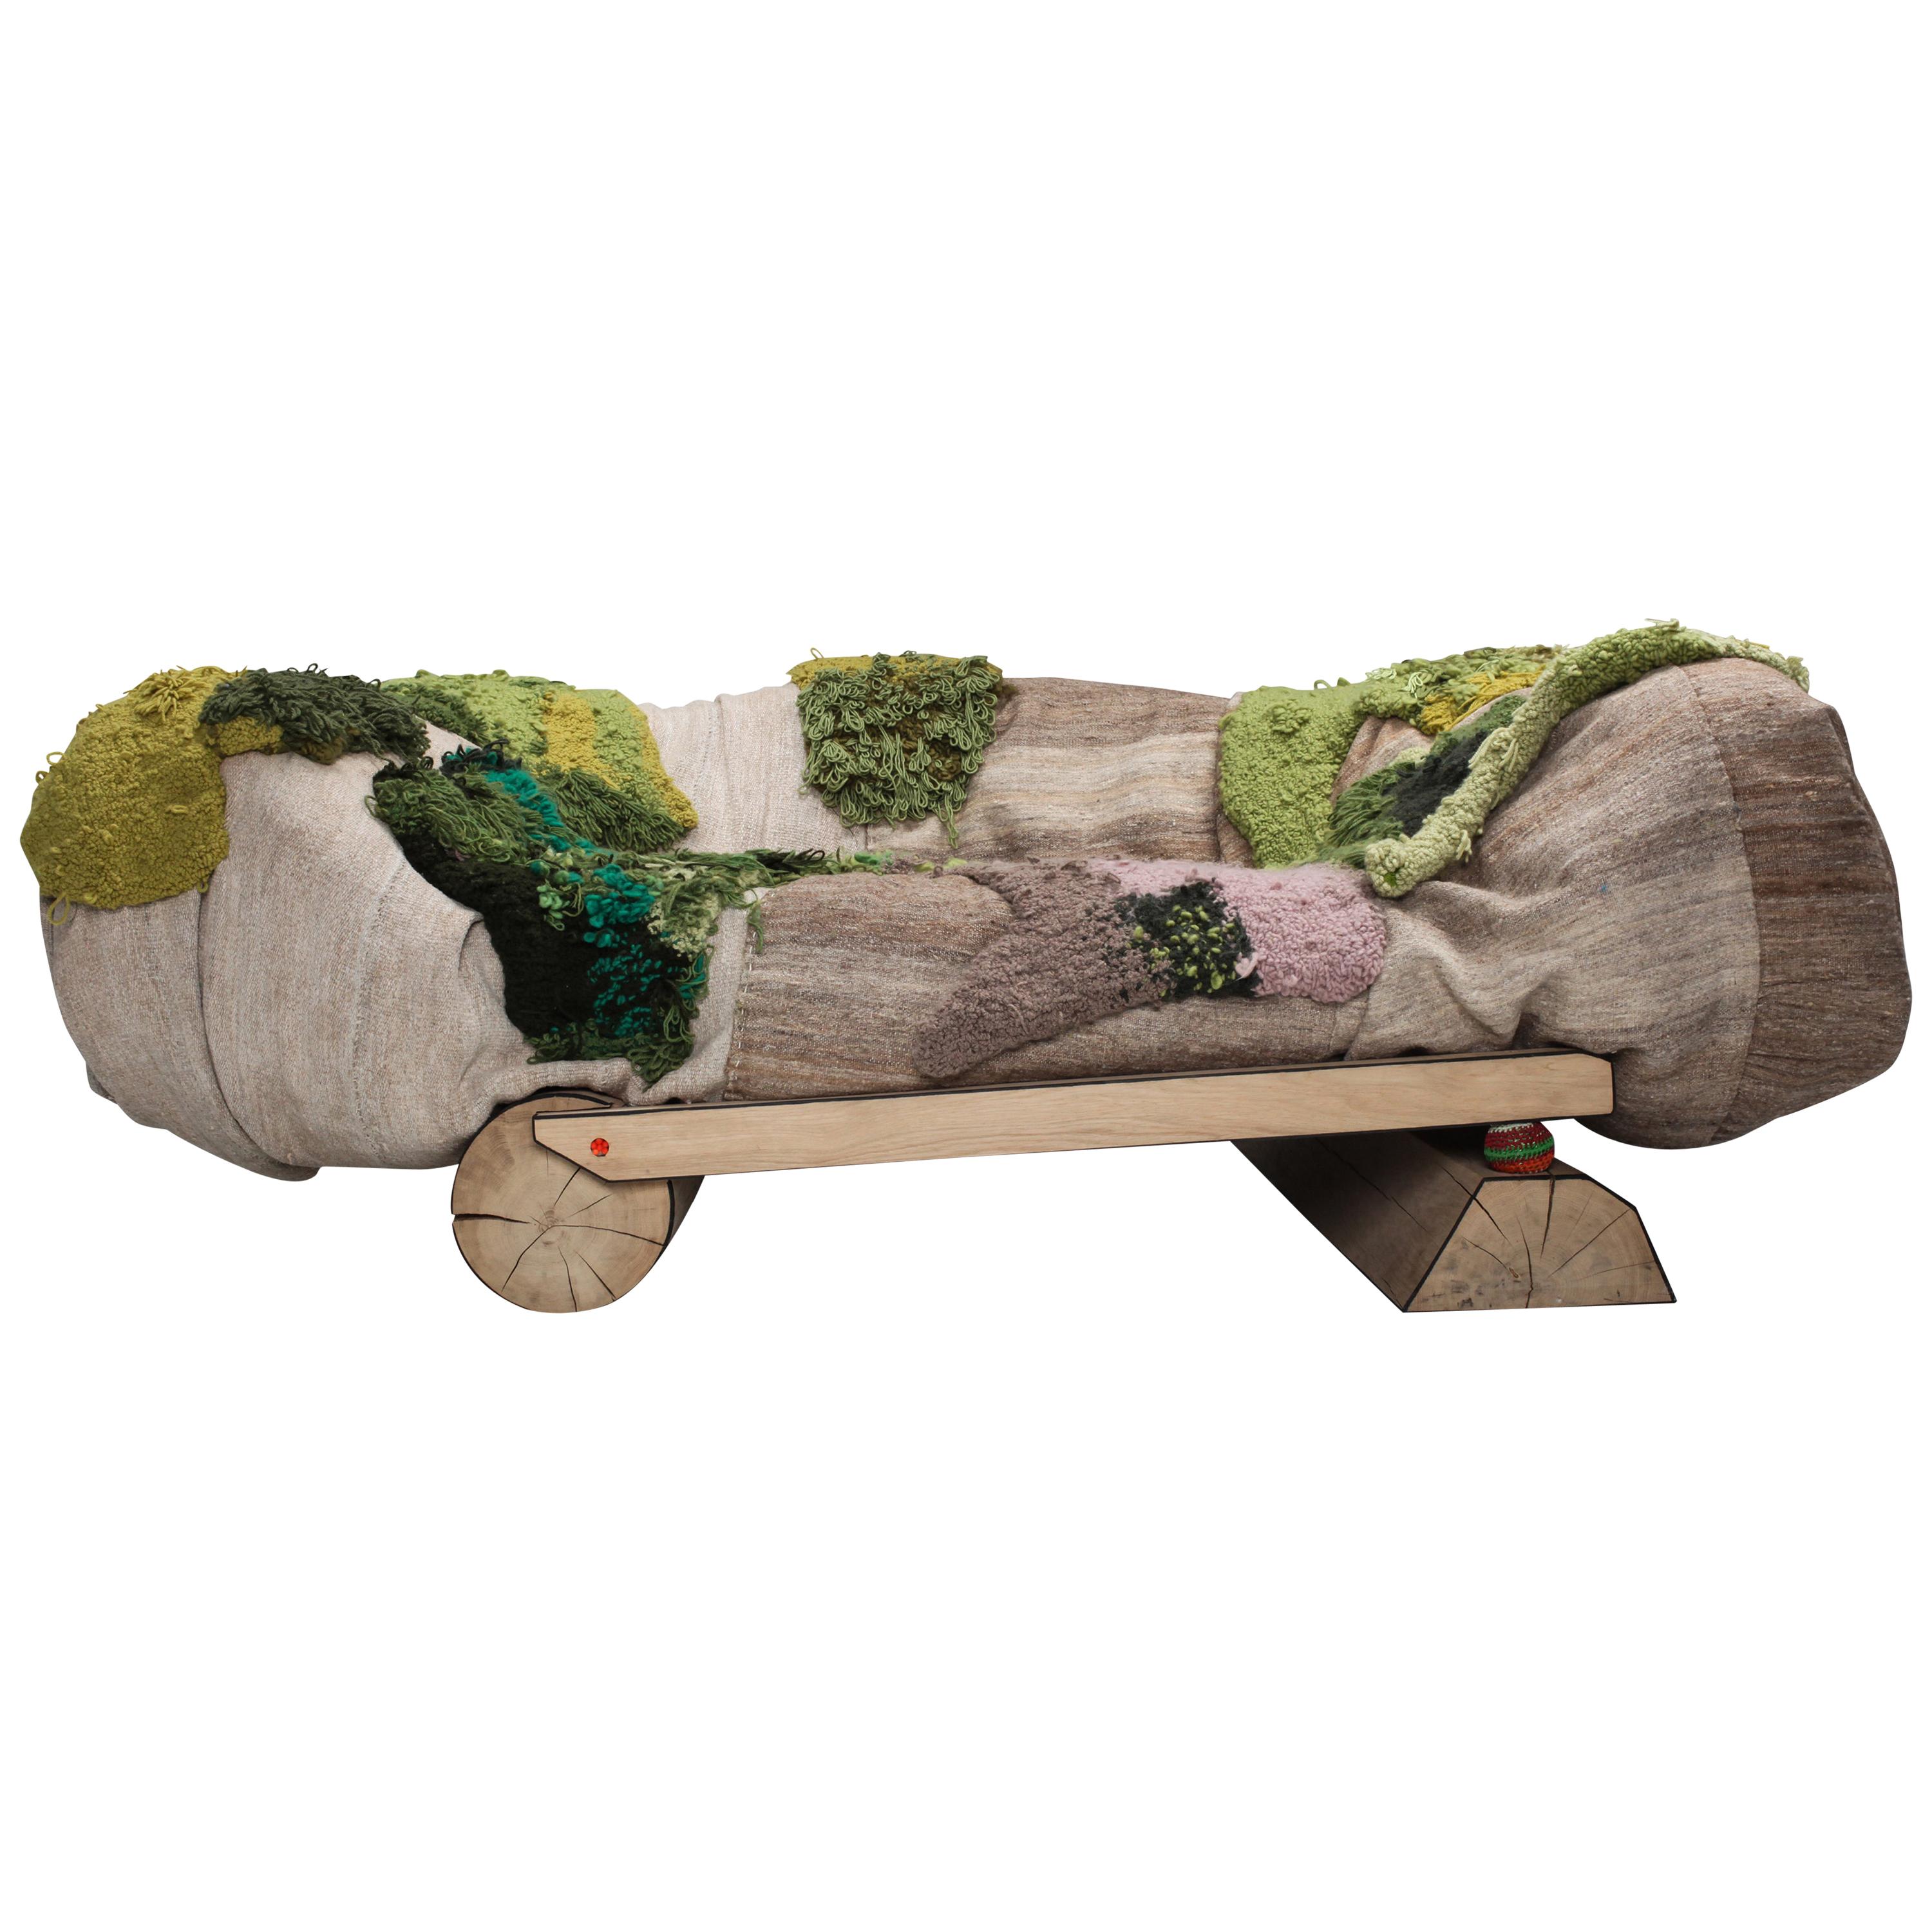 'Sit in My Valley II' Woven Raw Wool and Solid Oak Sofa, Lionel Jadot, 2020